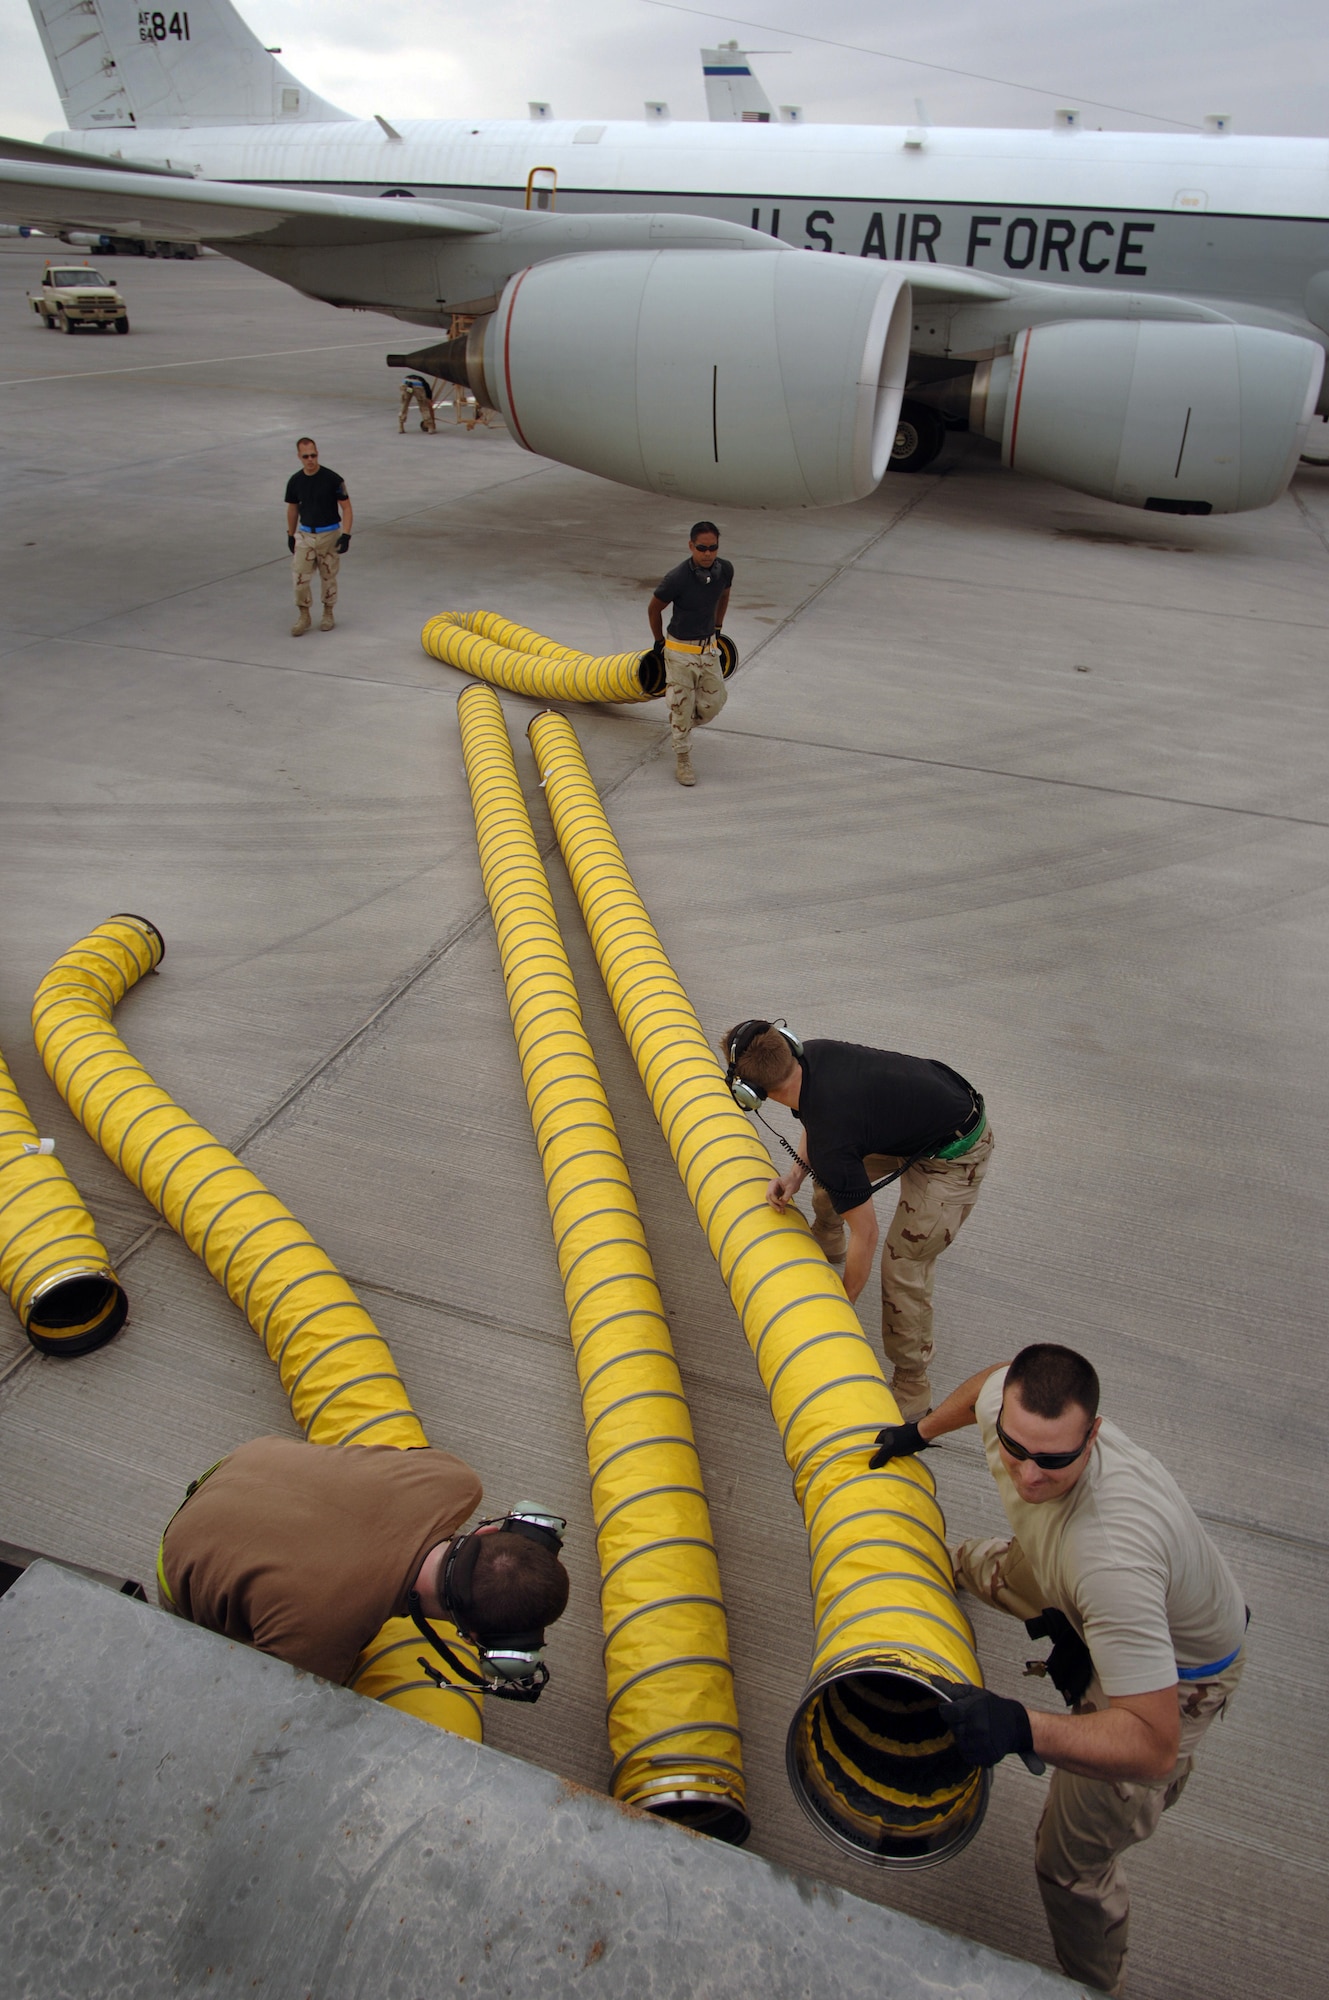 After the removal of air conditioning hoses that were connected to an RC-135 Rivet Joint reconnaissance aircraft, Staff Sgt James Scott assists crew chiefs in stowing them away prior to the plane's departure for a mission over Southwest Asia. The hoses help maintain cool temperatures for the extensive inventory of electronics aboard the plane during its lengthy start up process. Sergeant Scott is a life support technician deployed from the 343rd Reconnaissance Squadron and the crew chiefs are from the 55th Aircraft Maintenance Squadron from Offutt Air Force Base, Neb. (U.S. Air Force photo/Master Sgt. Scott Wagers)